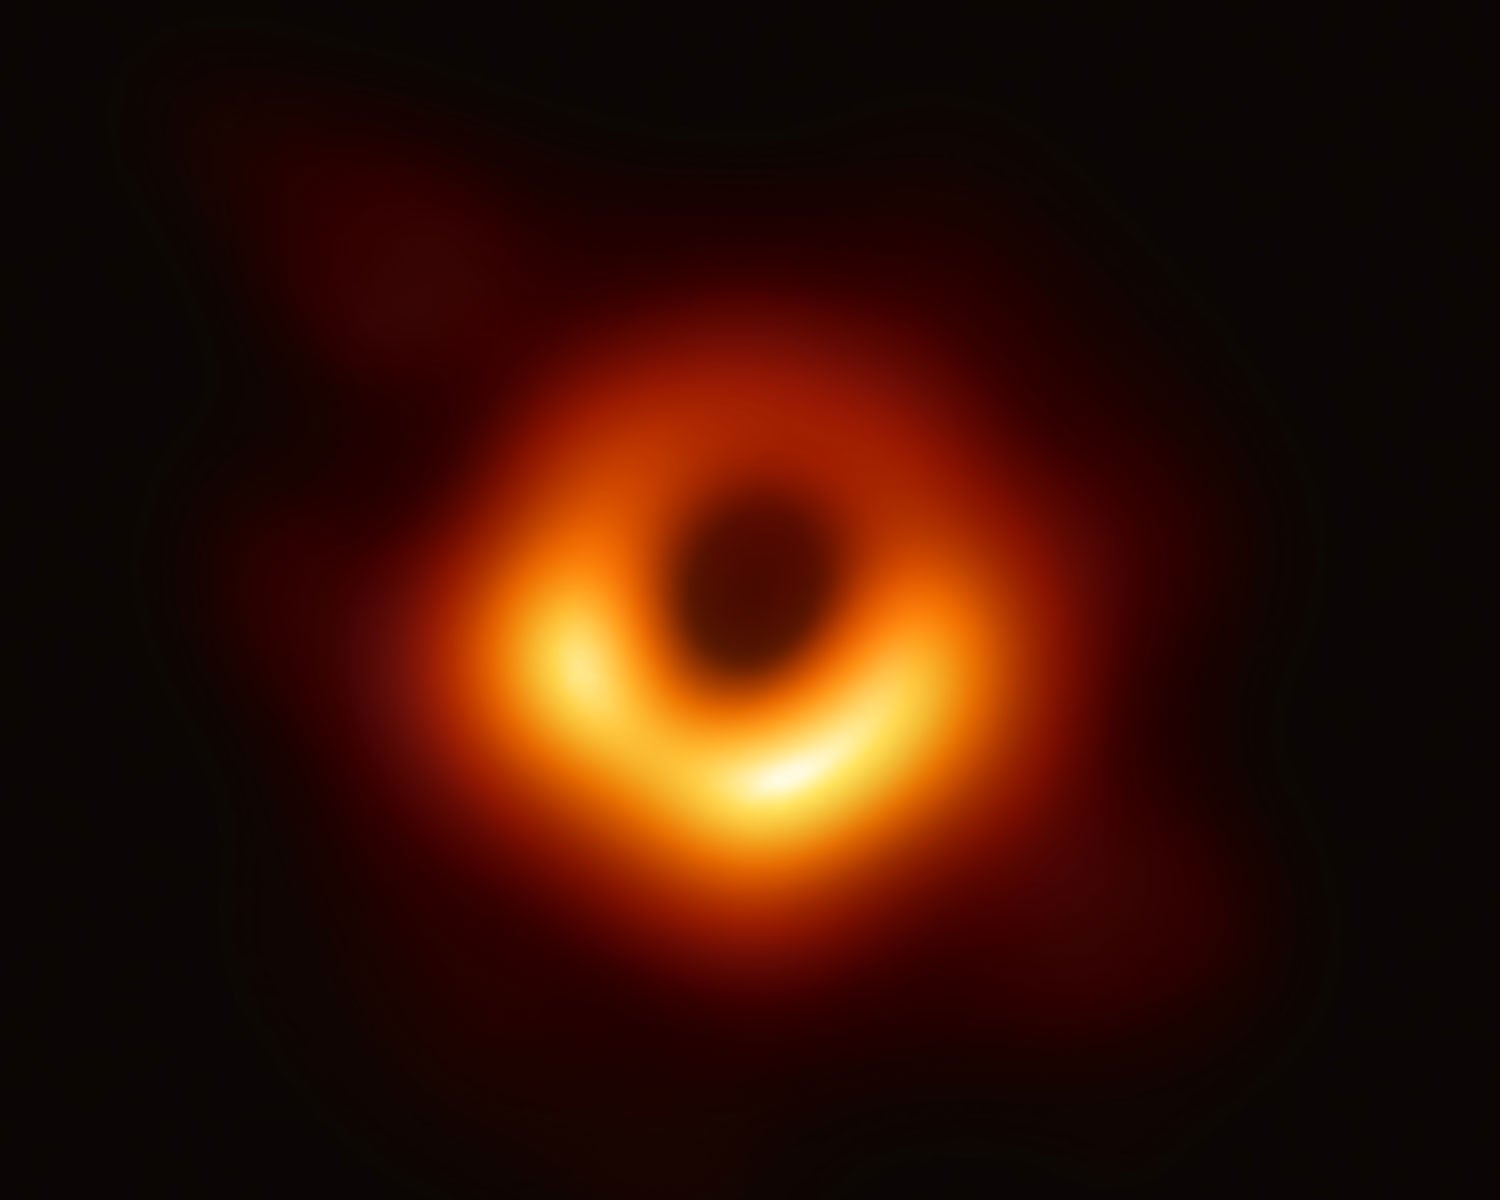 First image of a black hole, using Event Horizon Telescope